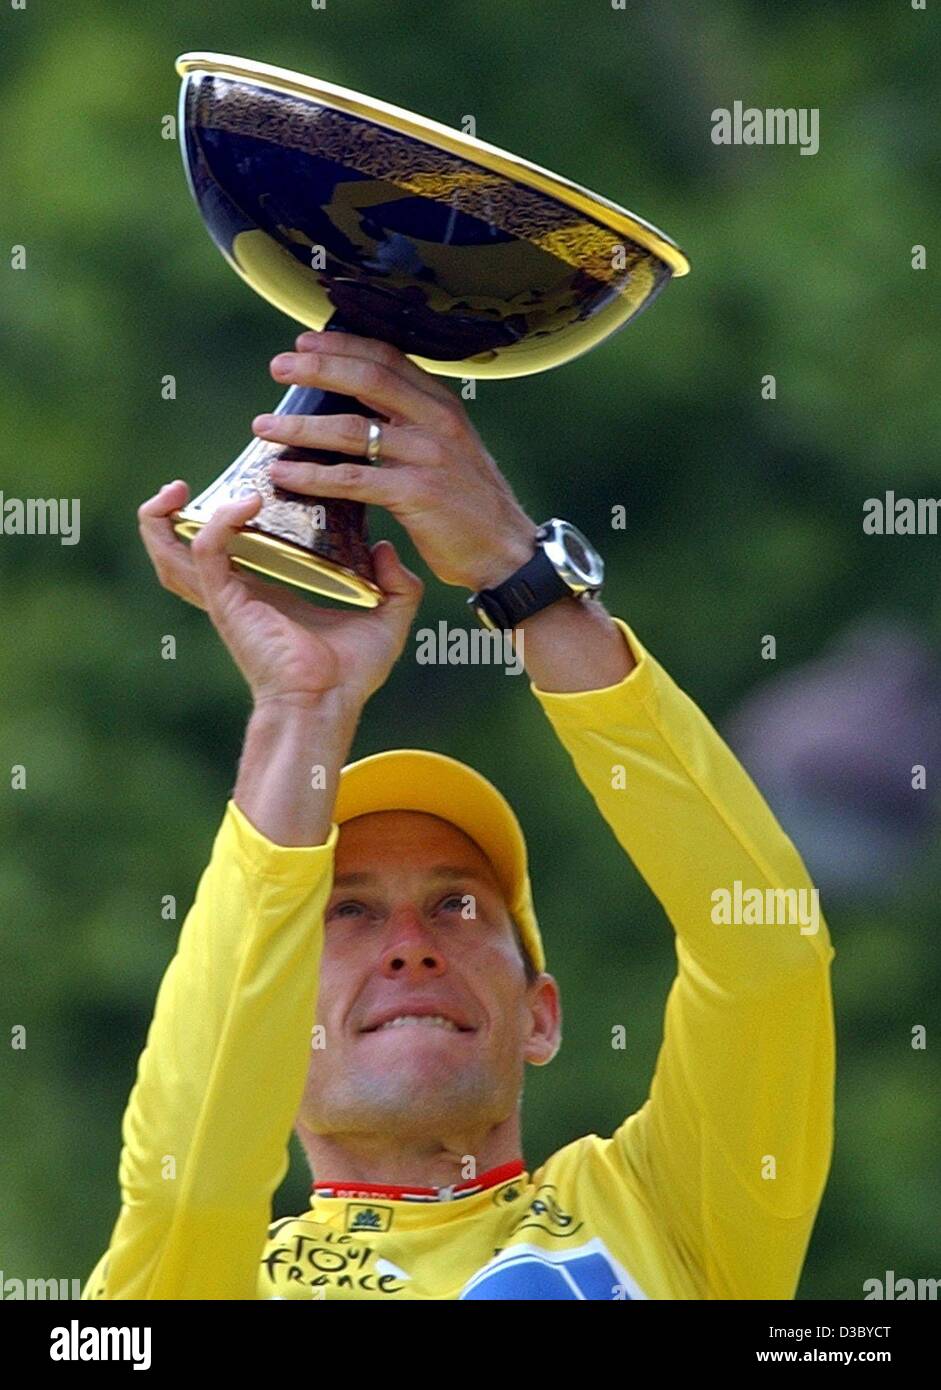 (dpa) -  US Postal-Berry Floor's Lance Armstrong from the US, wearing the overall leader's yellow jersey, holds up the Tour de France 100th anniversary cup as he poses on the podium after the 20th stage of the 2003 Tour de France cycling race, in Paris, 27 July 2003. Armstrong became the second ride Stock Photo